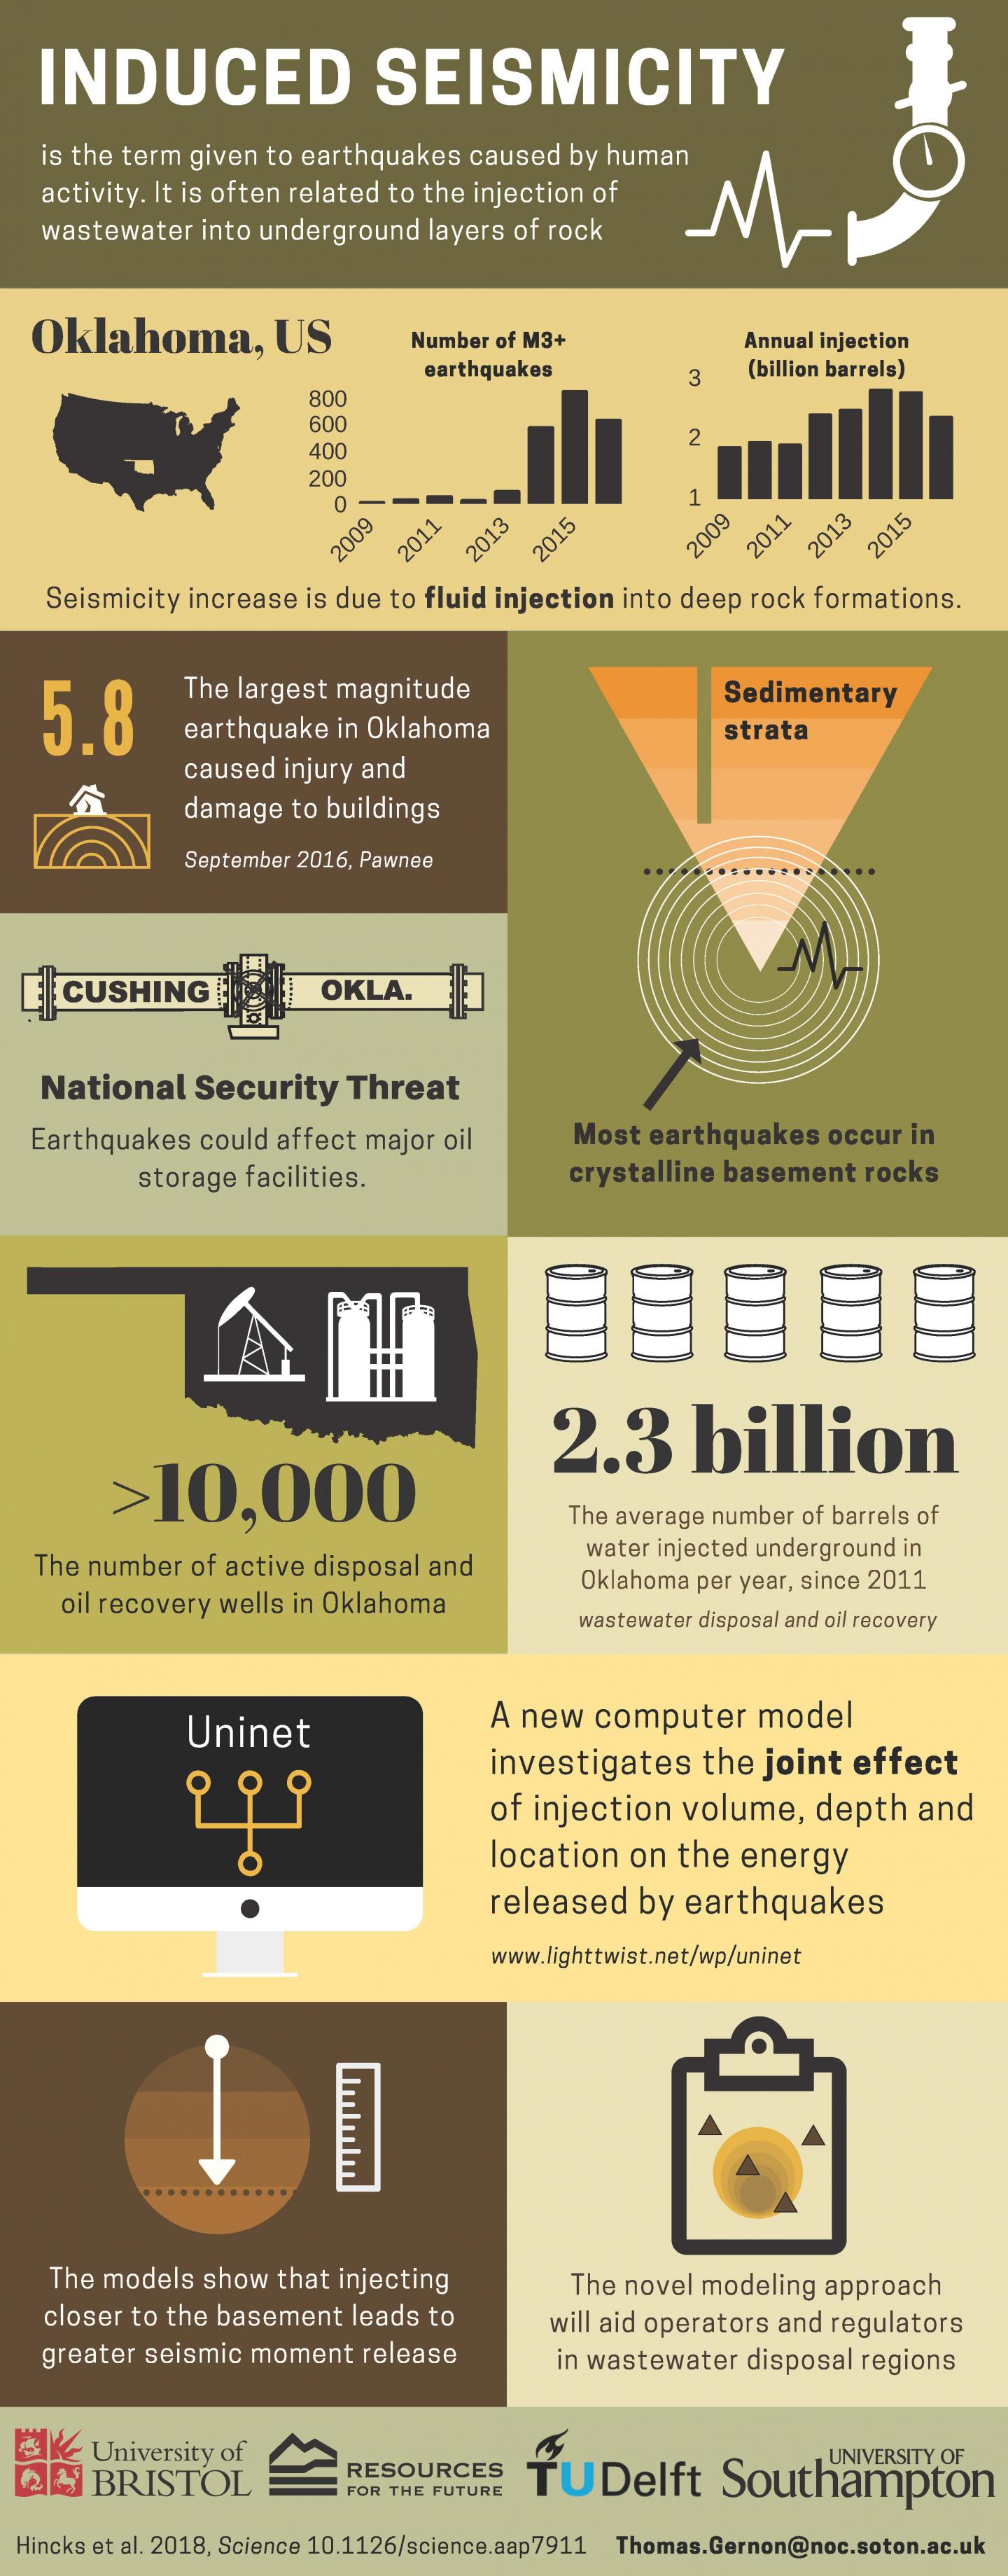 An infographic showing the causes and consequences of induced seismicity in the U.S. State of Oklahoma. This material relates to a paper that appeared in the 2 February 2018 issue of Science, published by AAAS. The paper, by T. Hincks at University of Bristol in Bristol, UK, and colleagues was titled, "Oklahoma's induced seismicity strongly linked to wastewater injection depth." Credit Dr. Thomas Gernon, University of Southampton